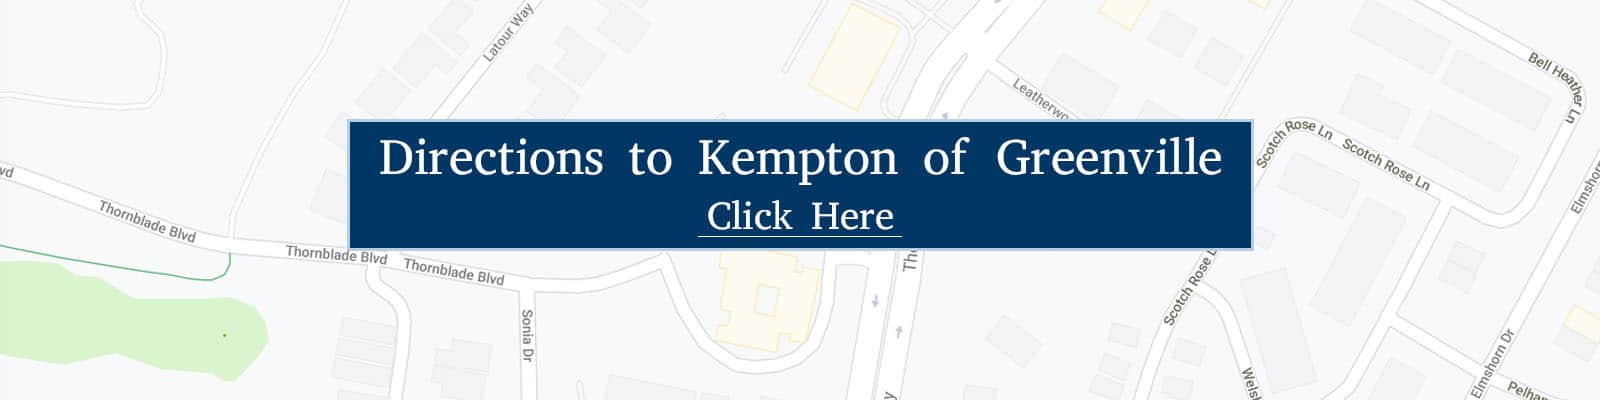 Directions and Map to Kempton of Greenville